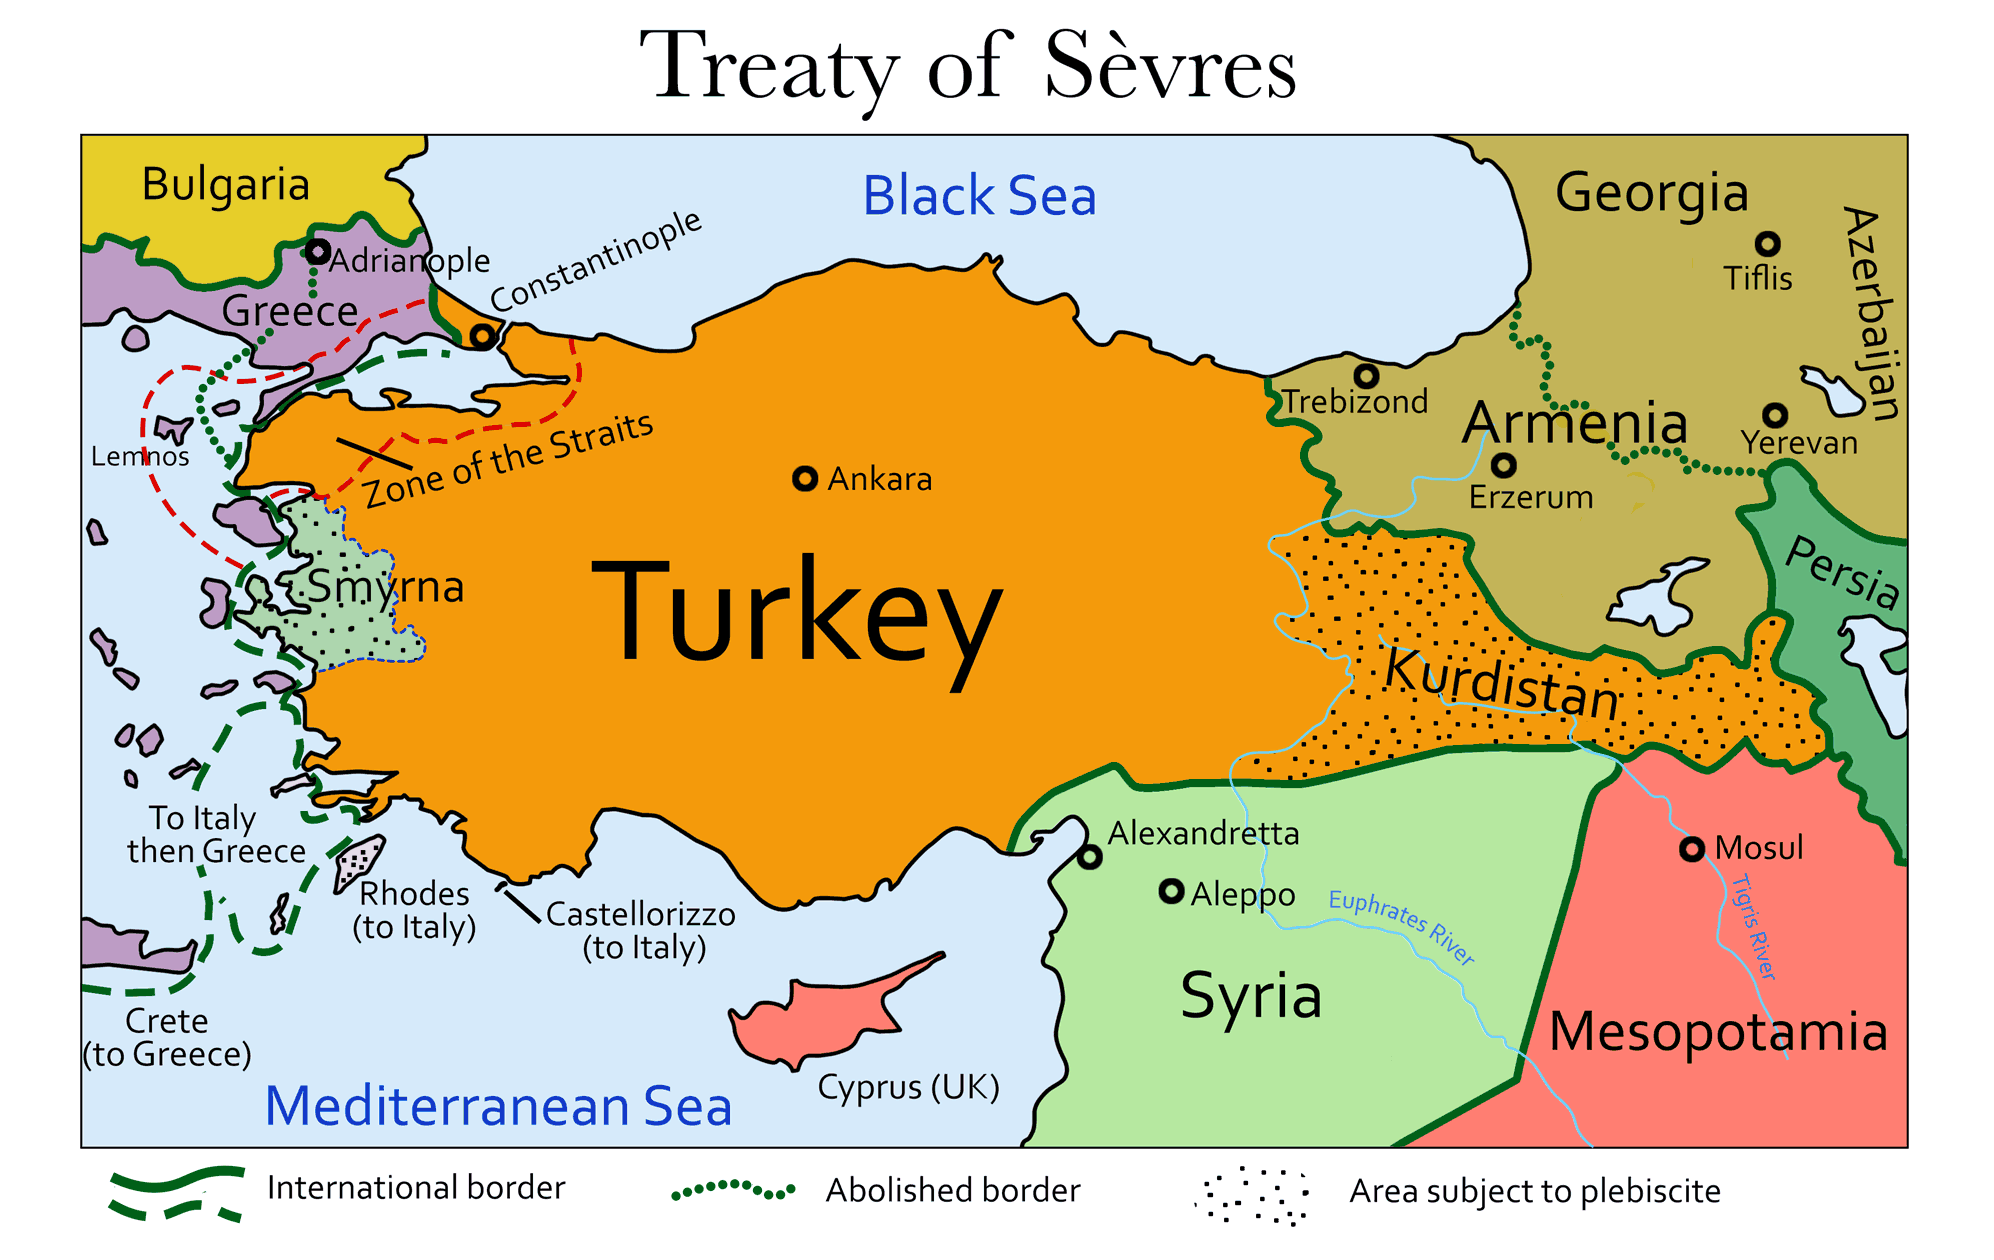 Partition of the Ottoman Empire according to the Treaty of Sèvres,1920.